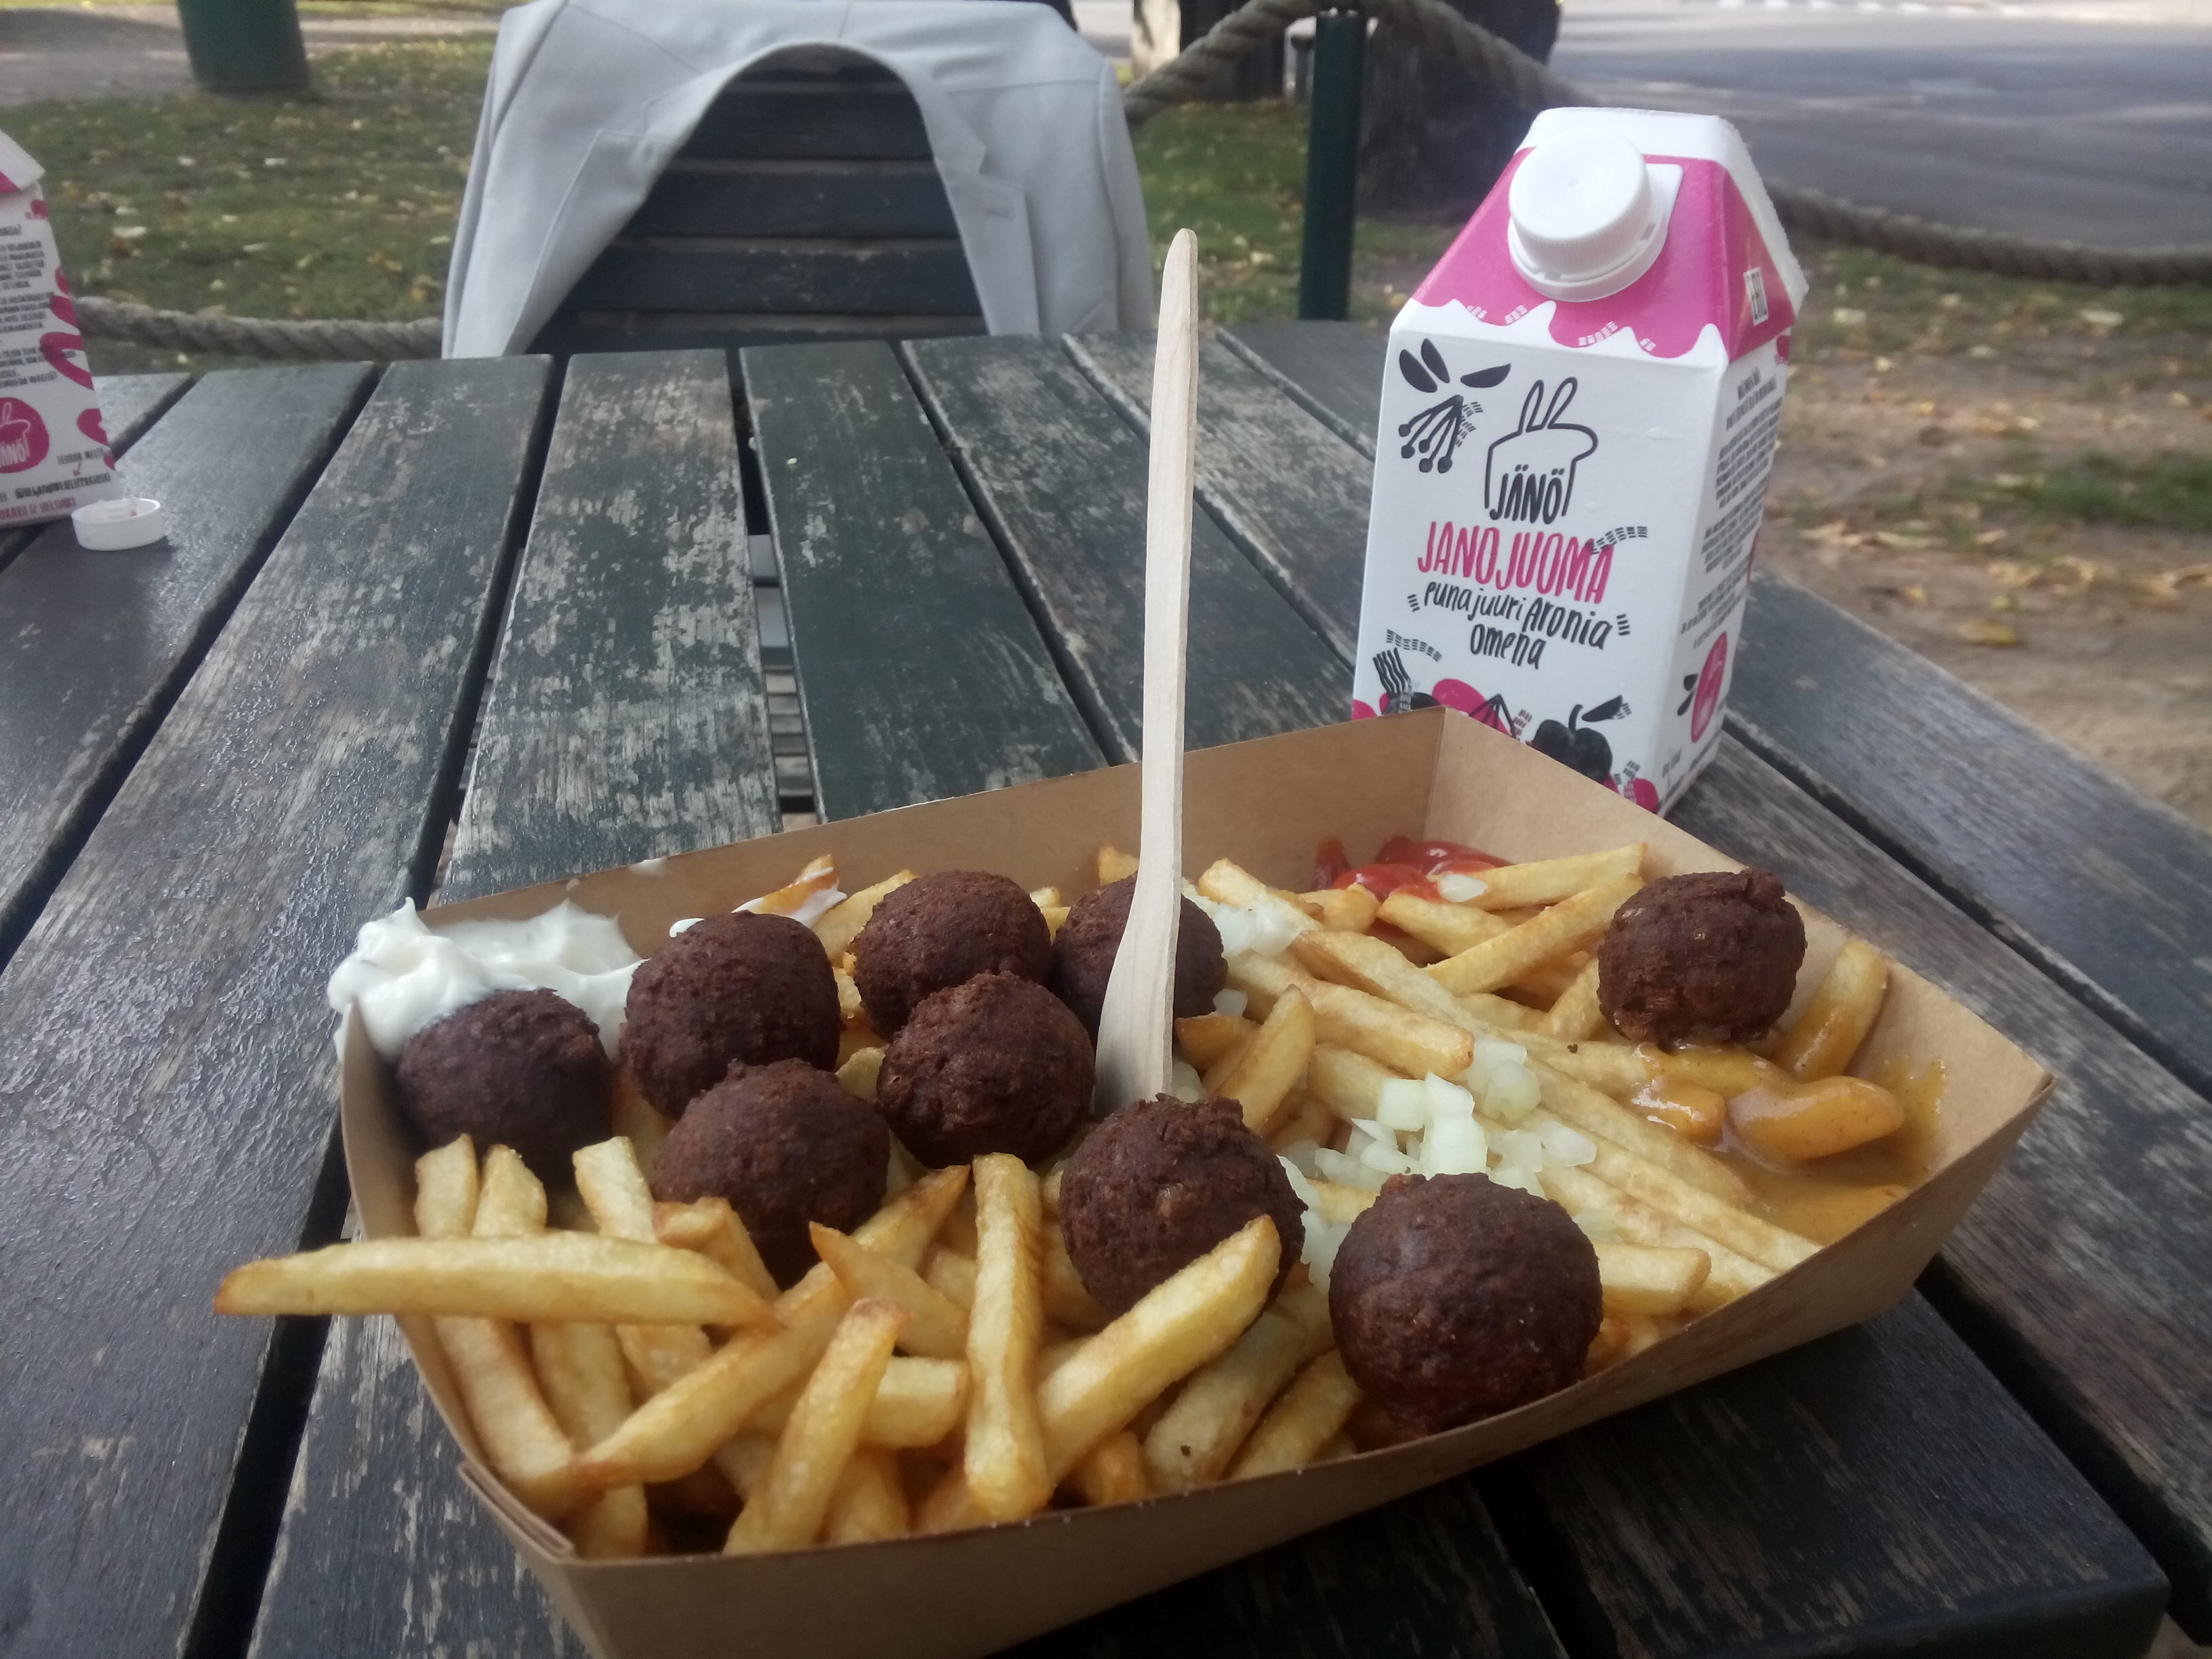 A wooden table outside holds a cardboard tray containing thin fries and not-meatballs; a pink and white carton of juice beside it